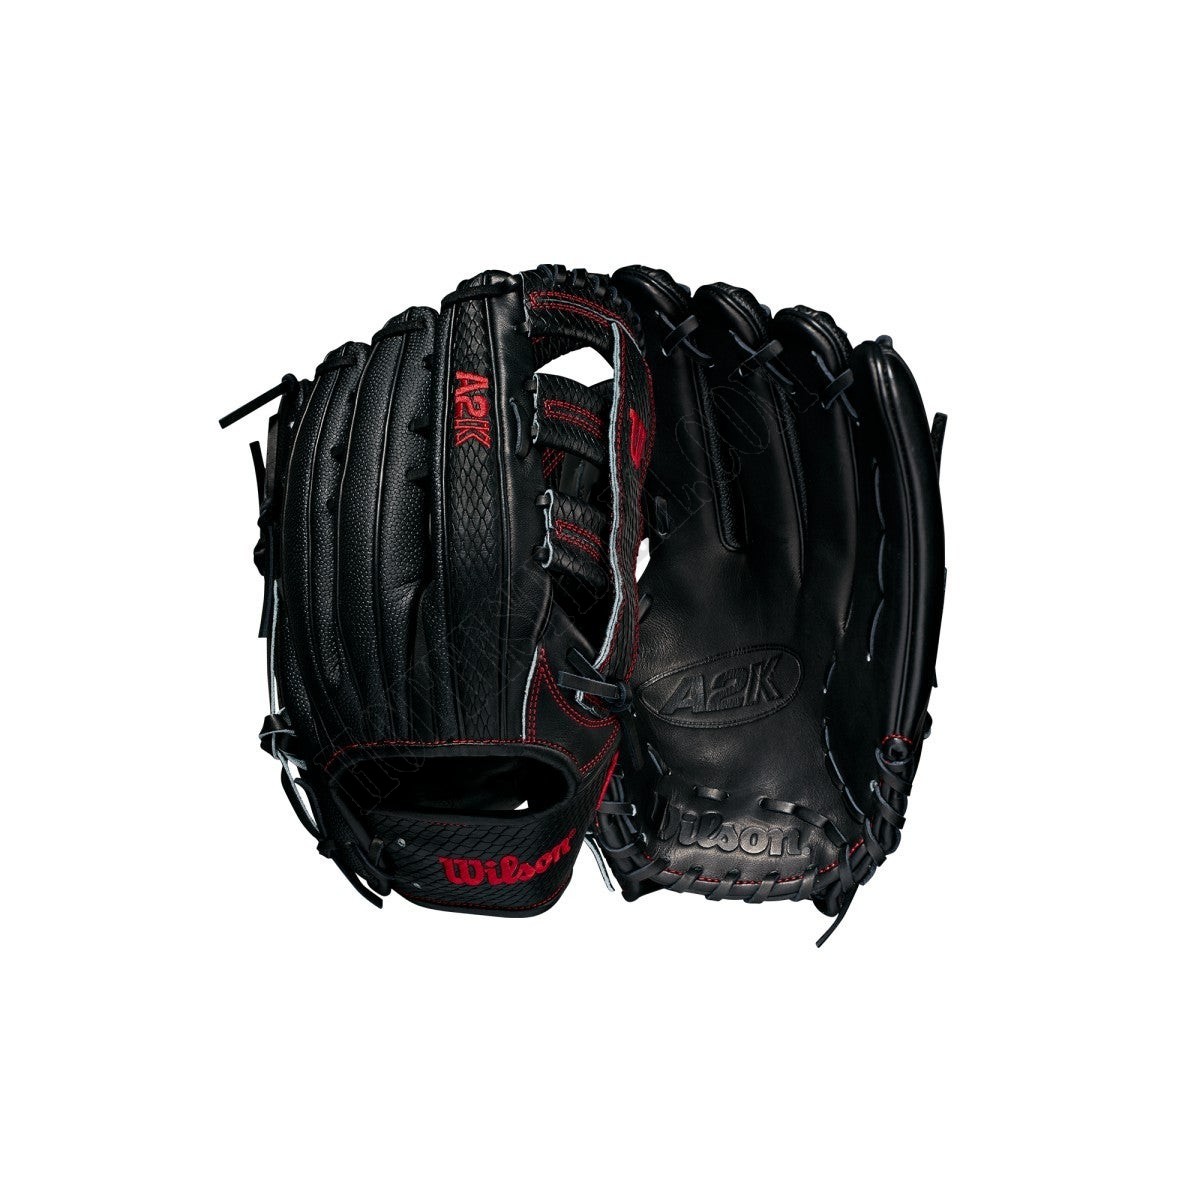 2021 A2K 1775SS 12.75" Outfield Baseball Glove ● Wilson Promotions - -0